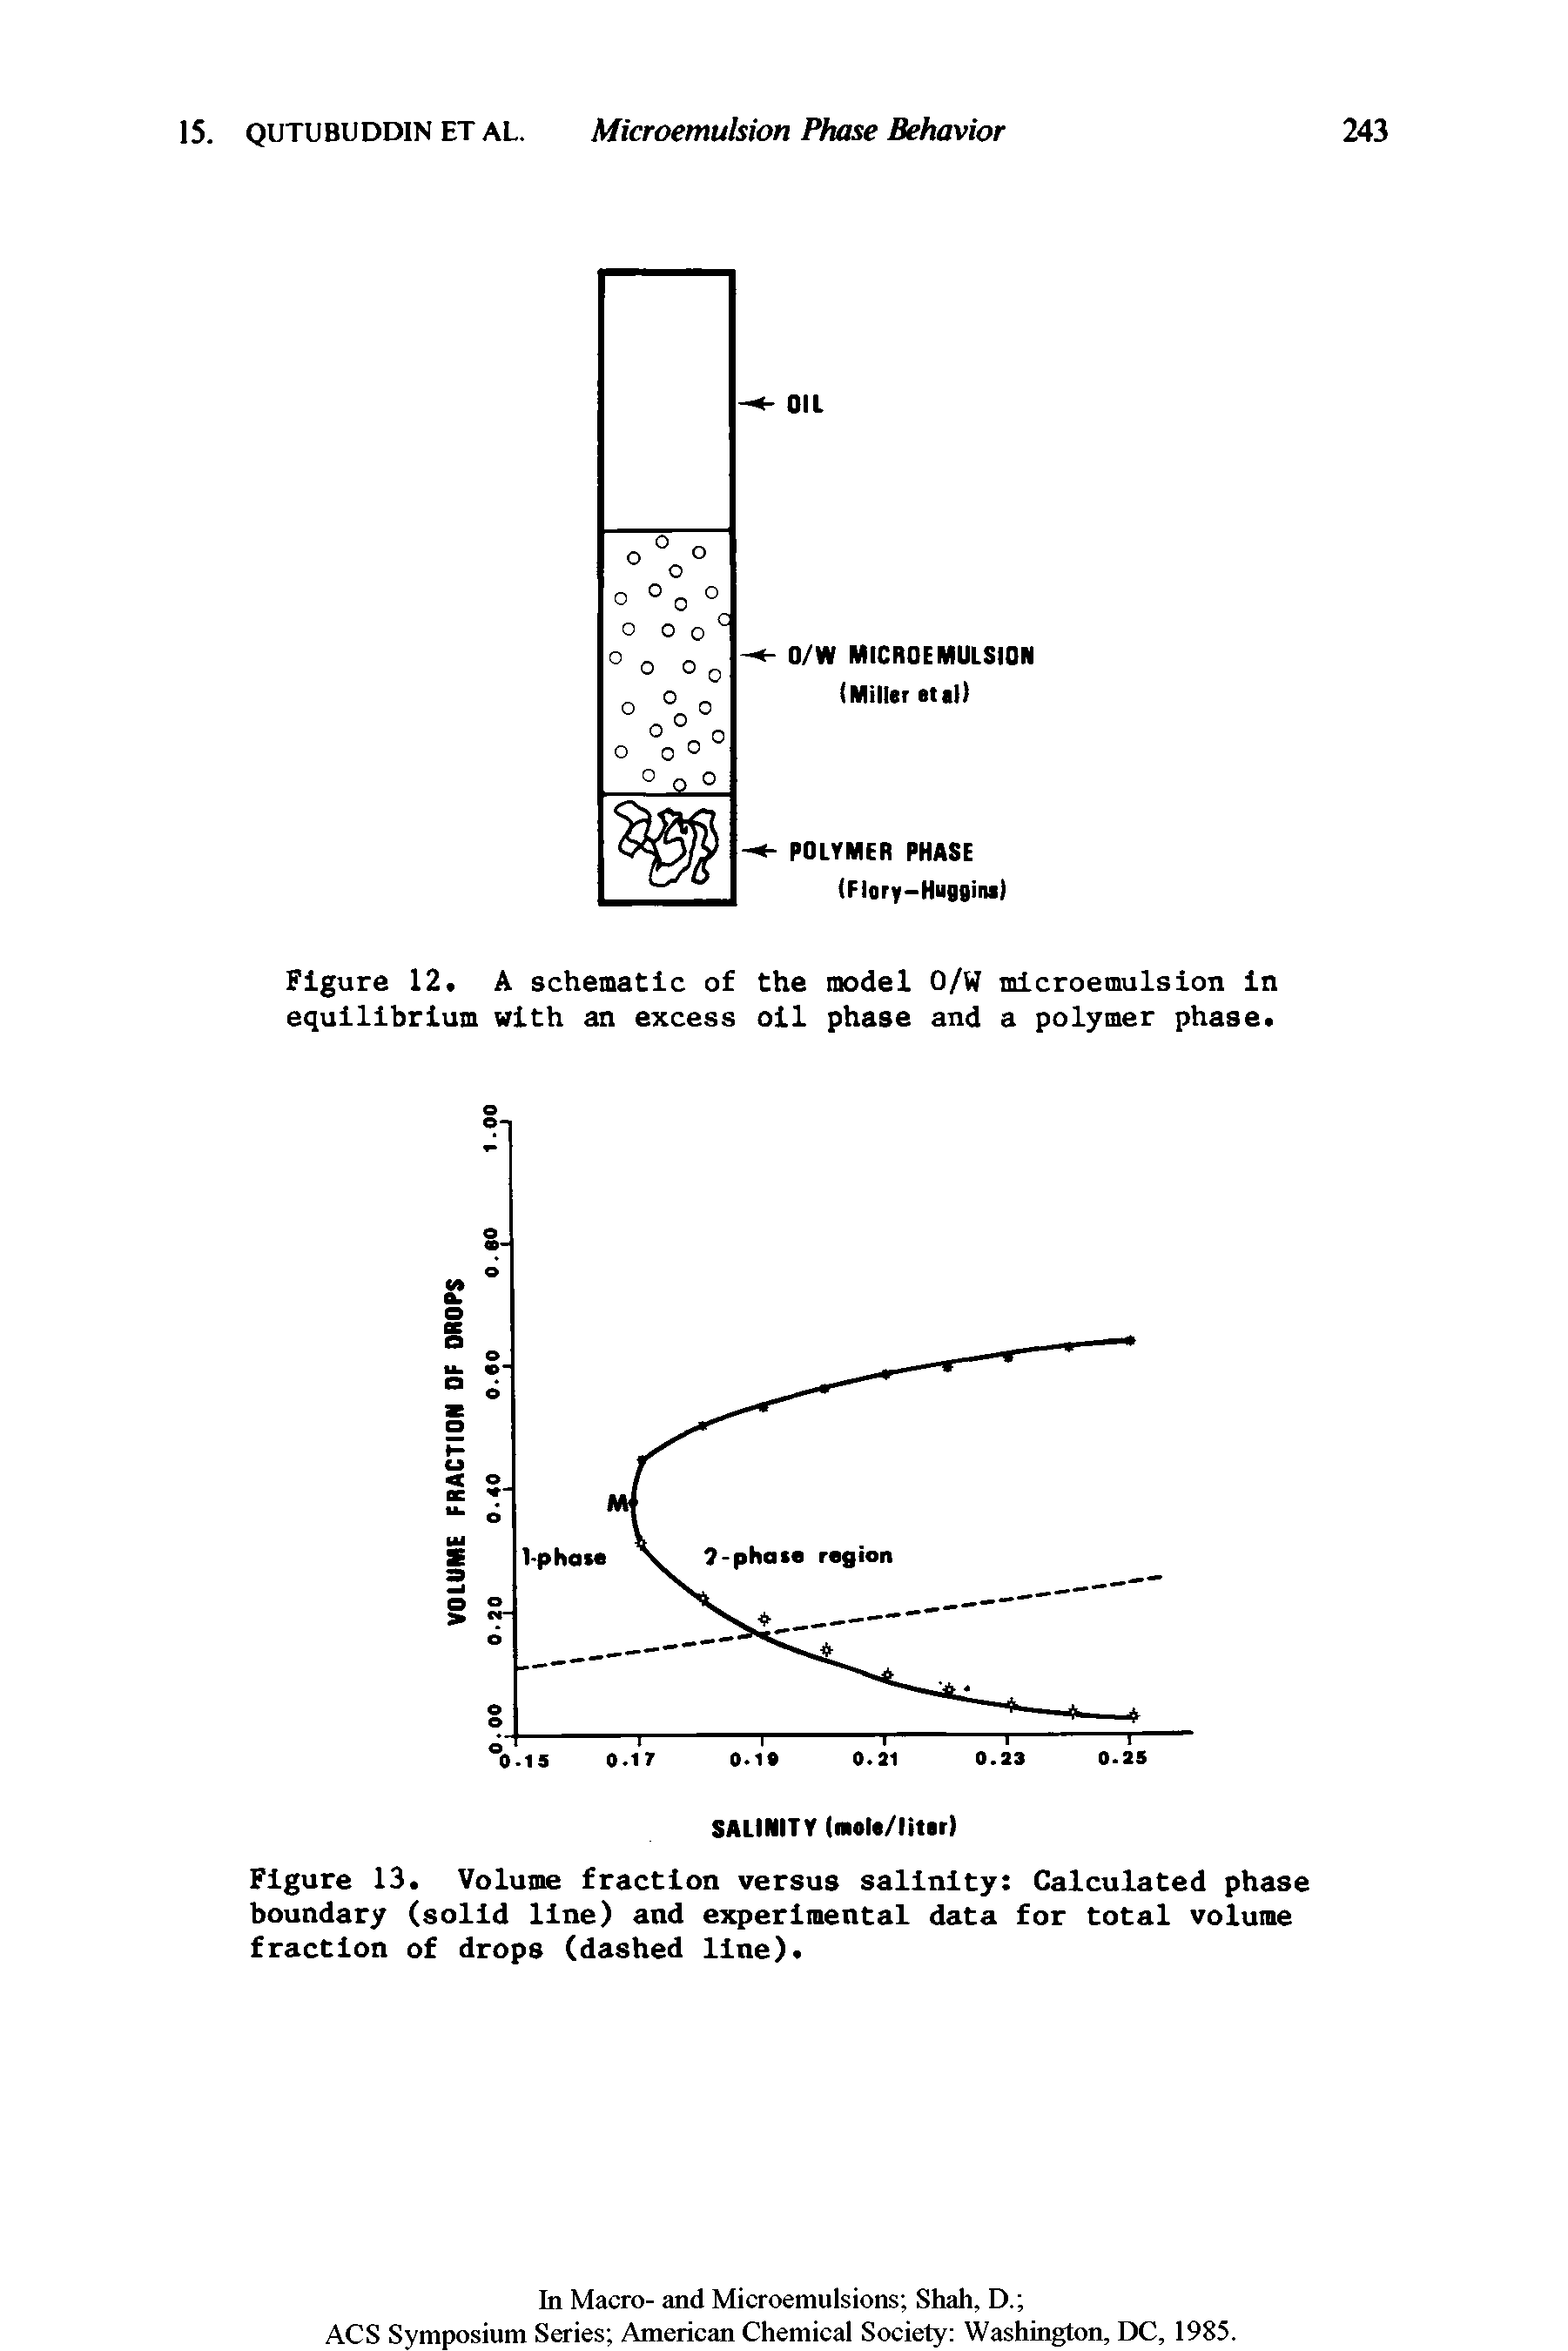 Figure 13. Volume fraction versus salinity Calculated phase boundary (solid line) and experimental data for total volume fraction of drops (dashed line).